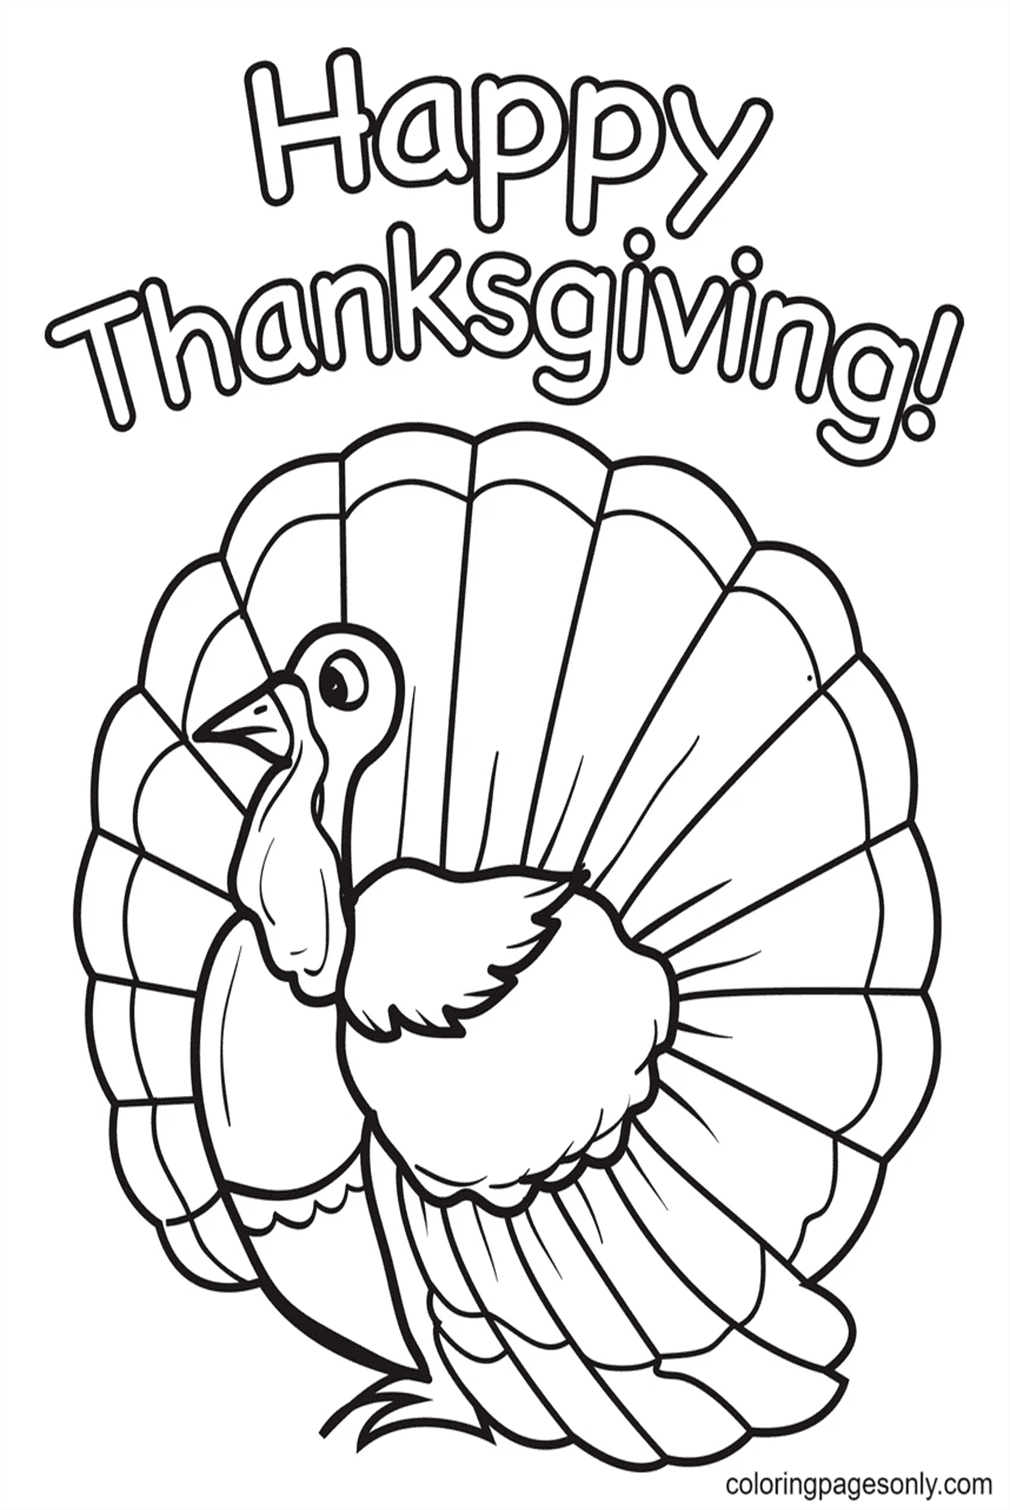 Printable Thanksgiving Turkey Coloring Page Free Printable Coloring Pages